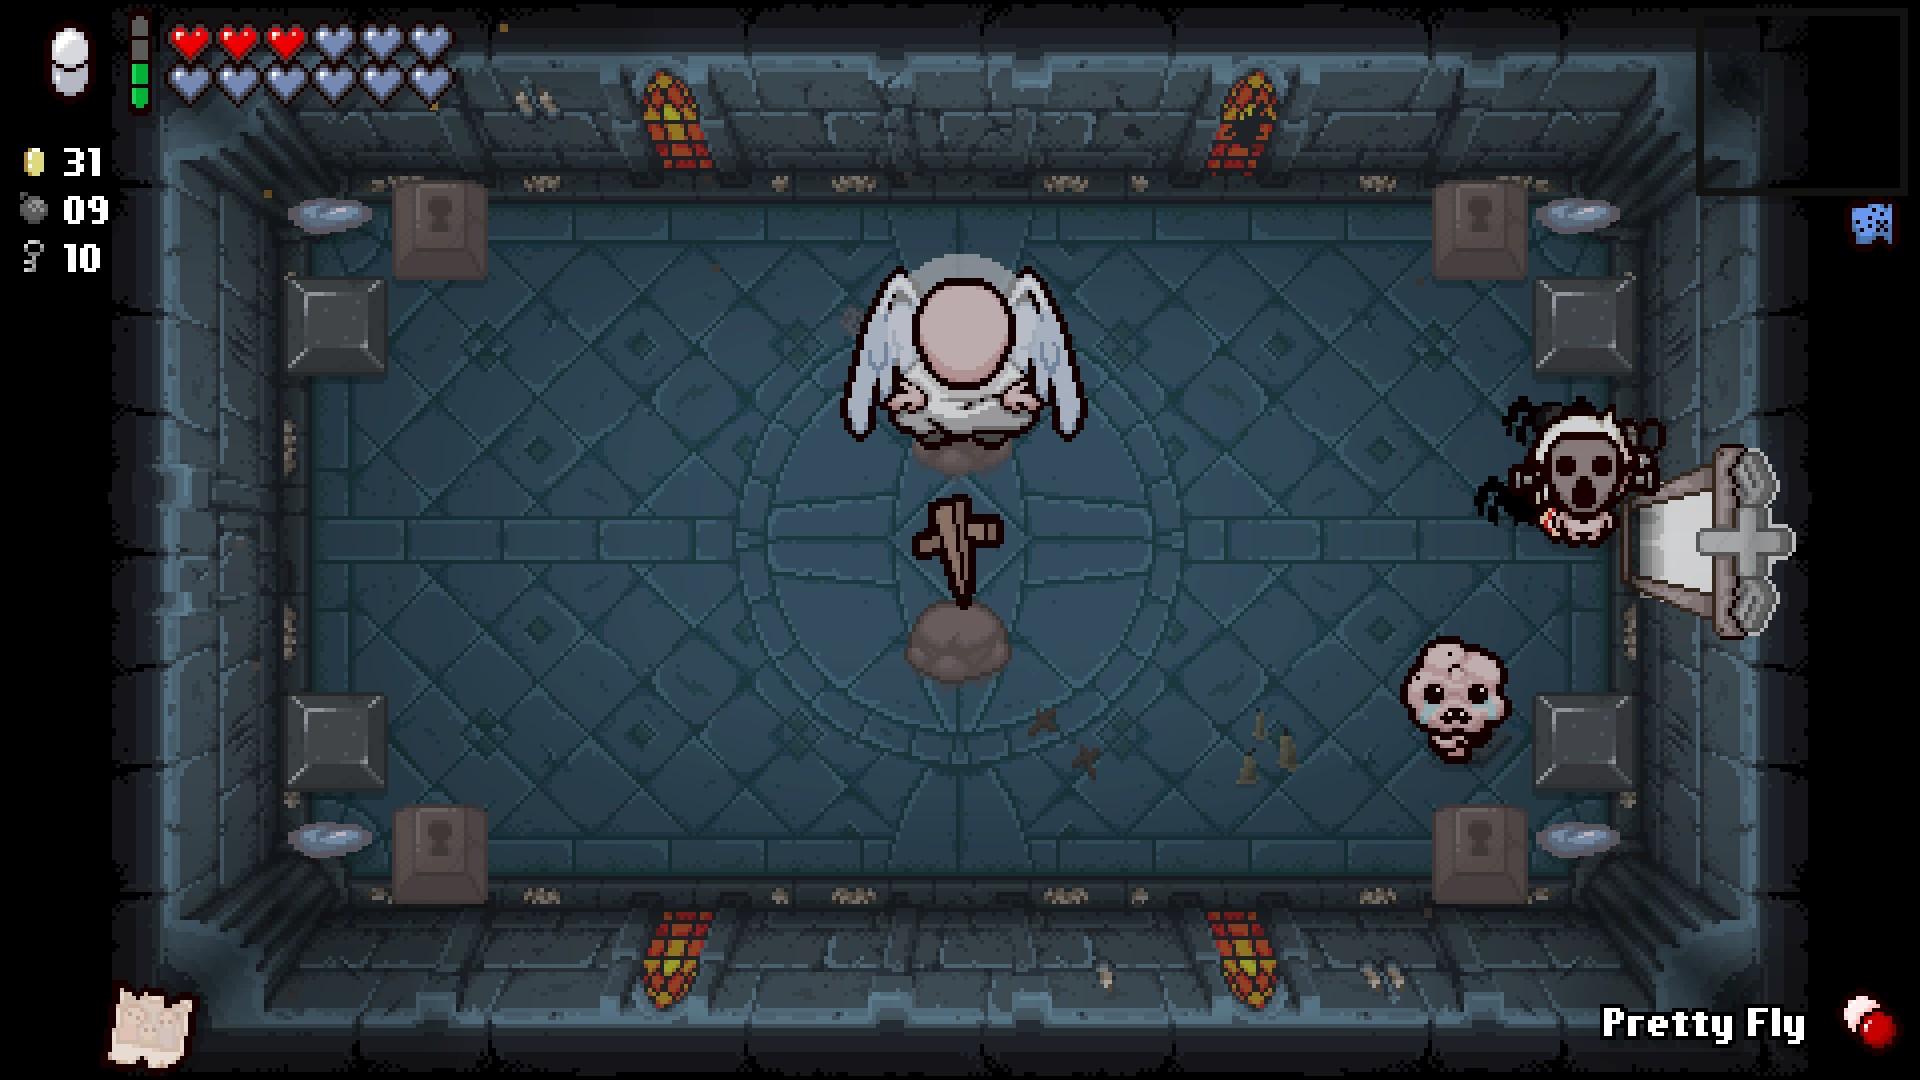 Heavenly Angels Afterbirth Modding Of Isaac